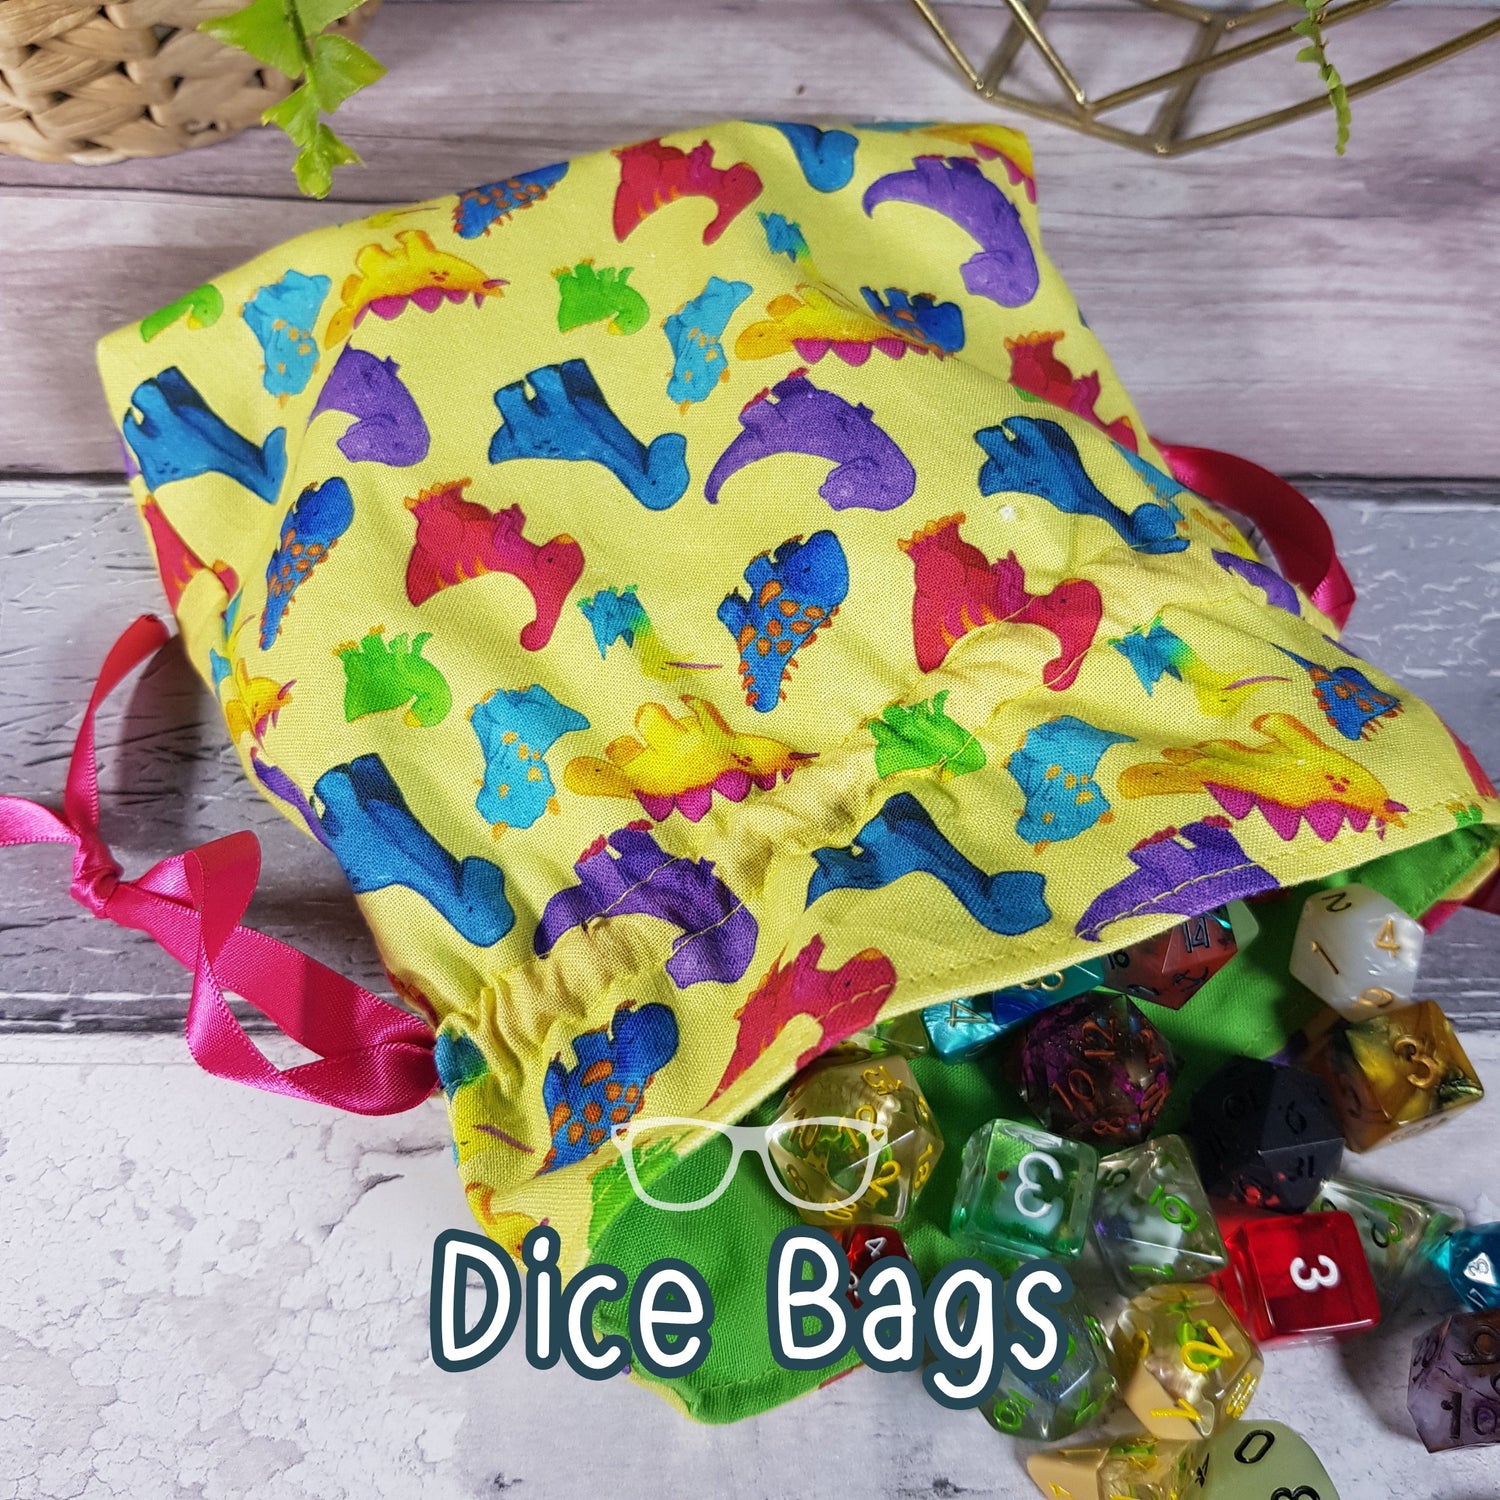 Dice bags with all sorts of themes, the bag shown has dinosaurs